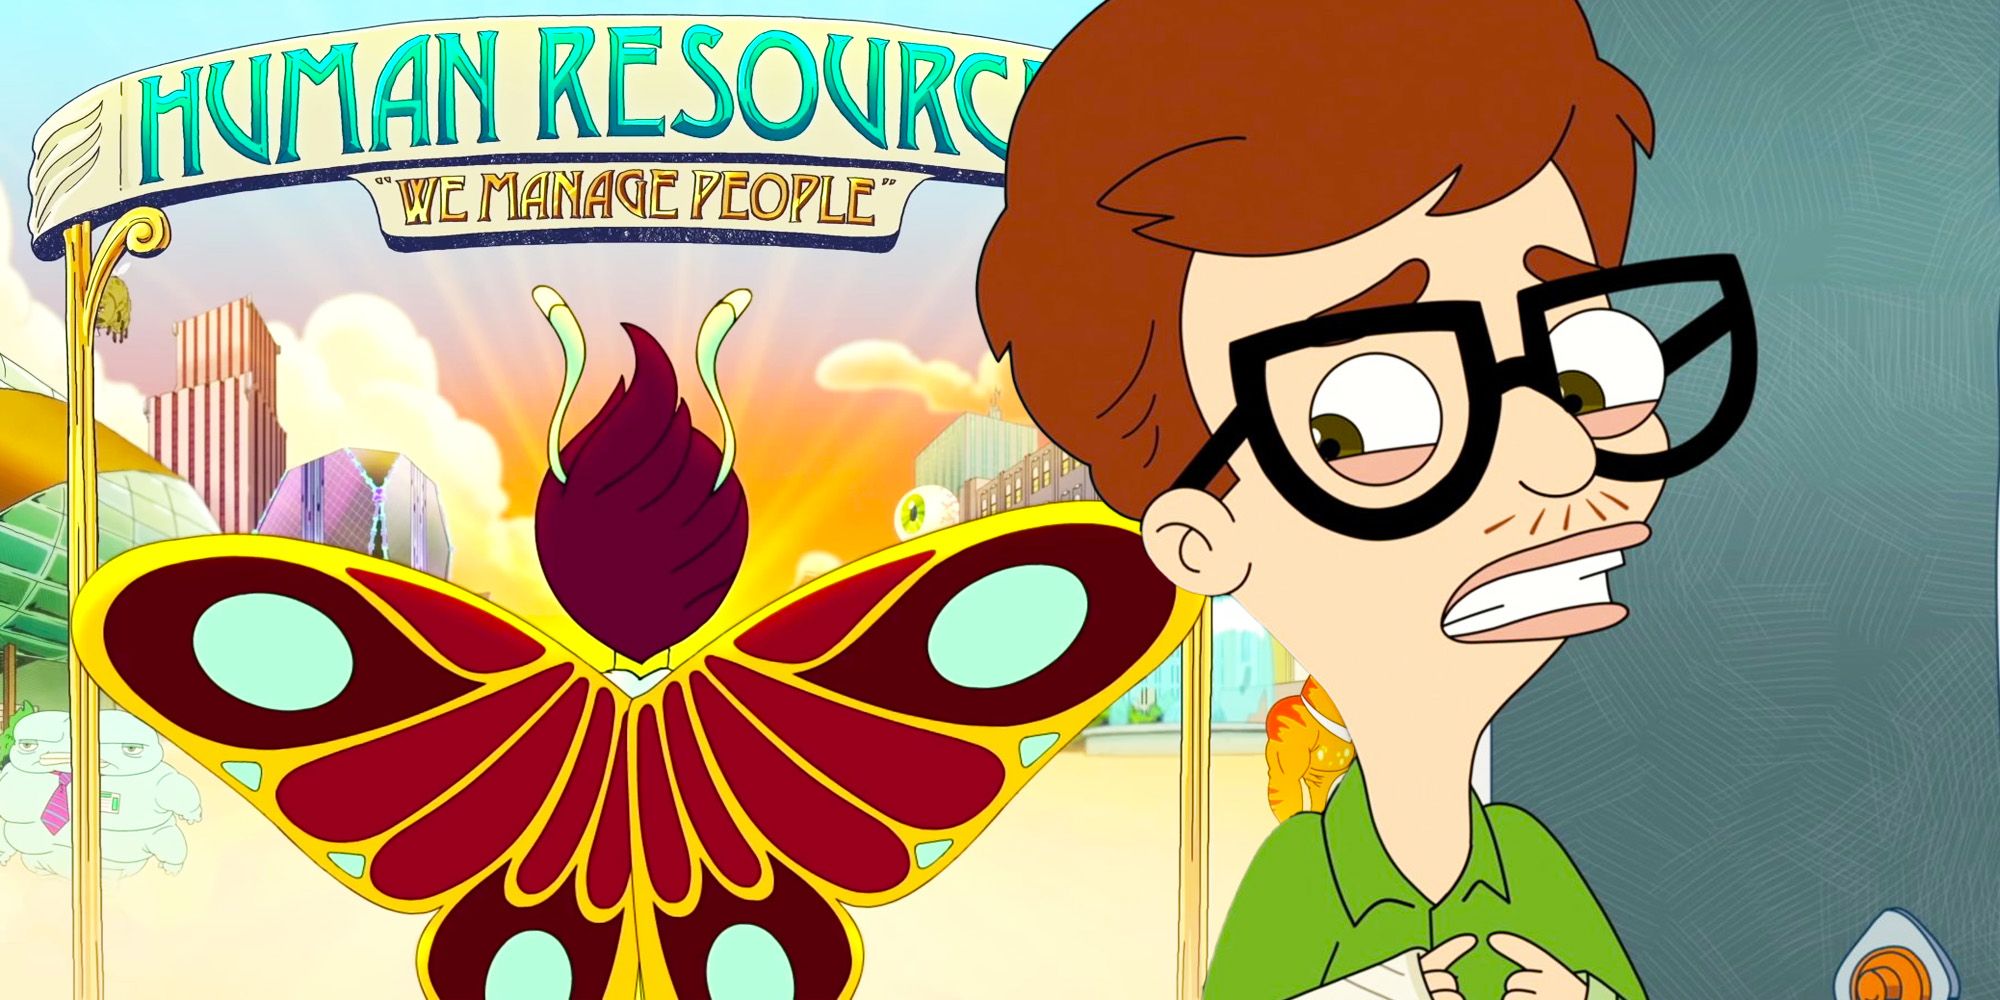 Human Resources spoofing Big Mouth made the show better